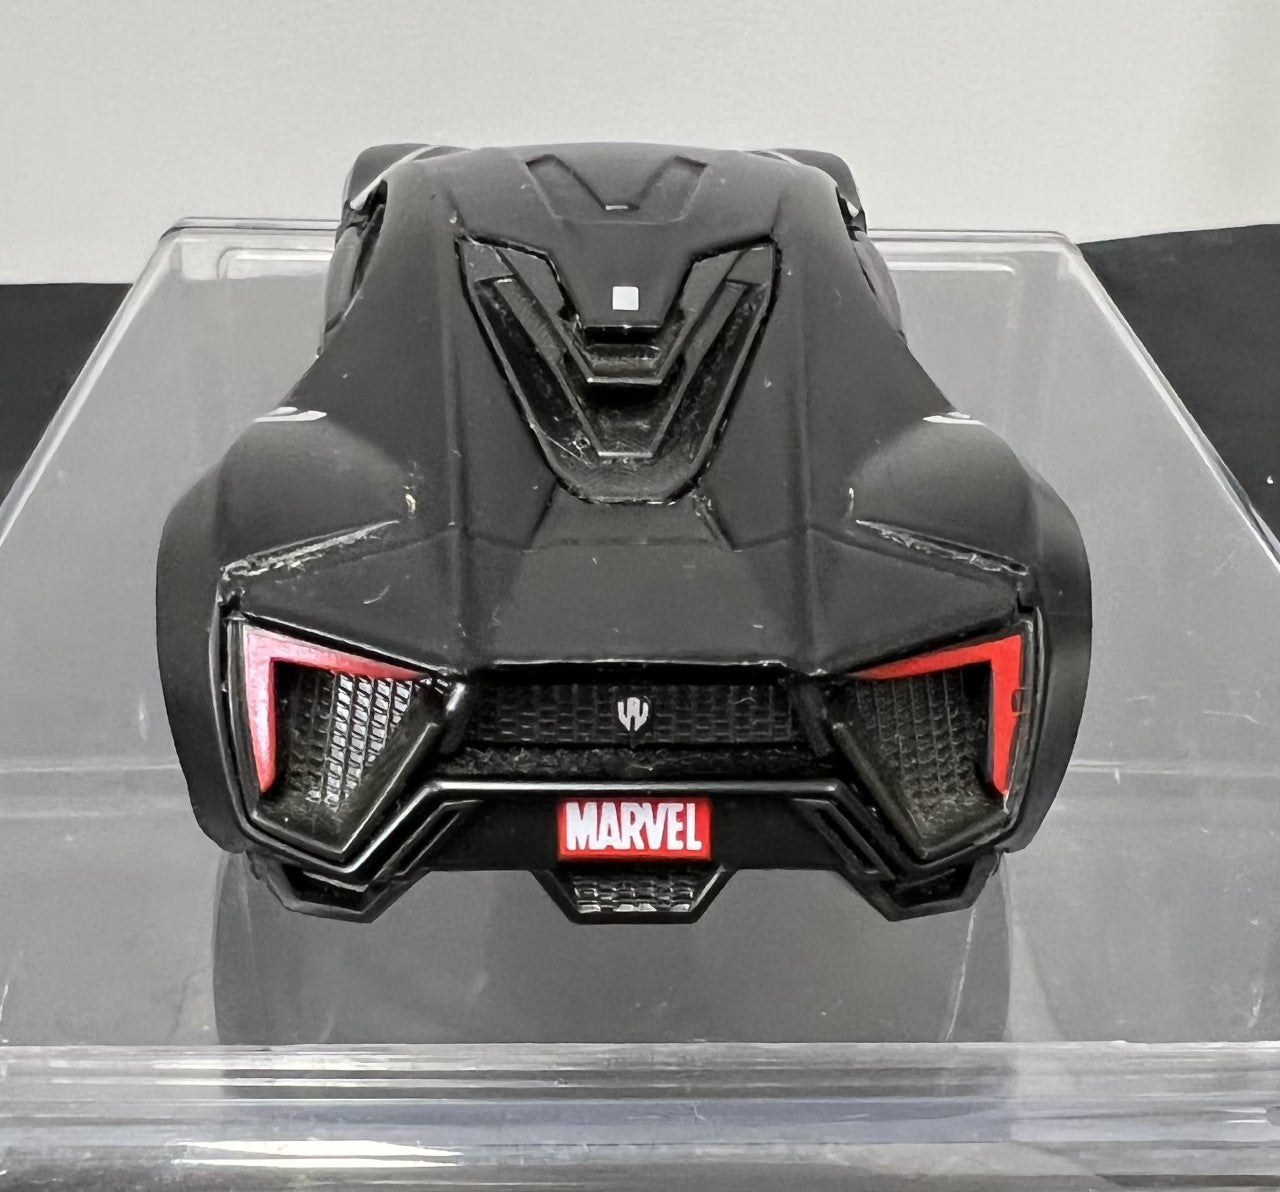 Collectible - Marvel Avengers Black Panther & Lykan Hypersport